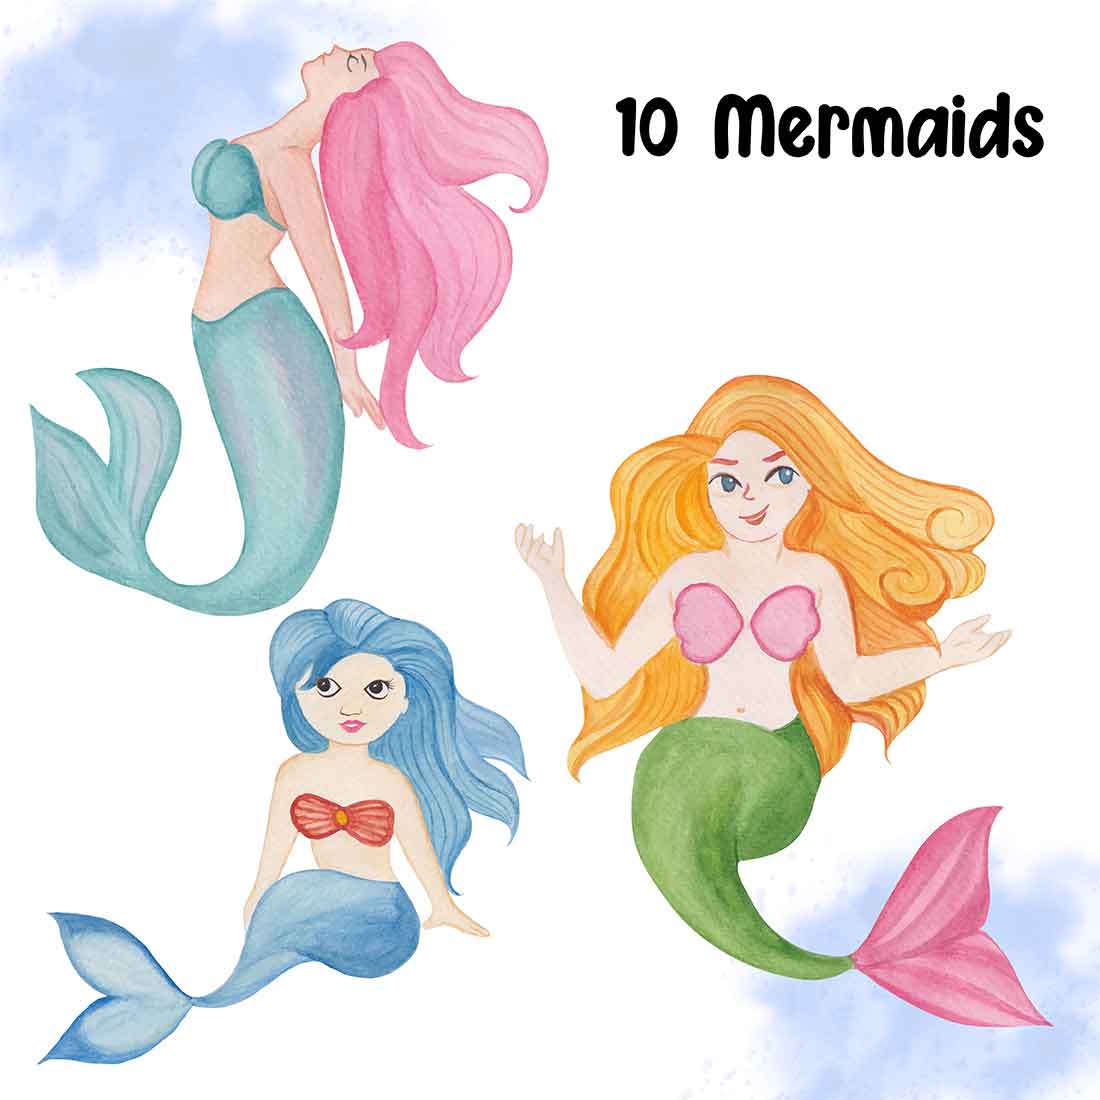 Collection of wonderful watercolor images of little mermaids